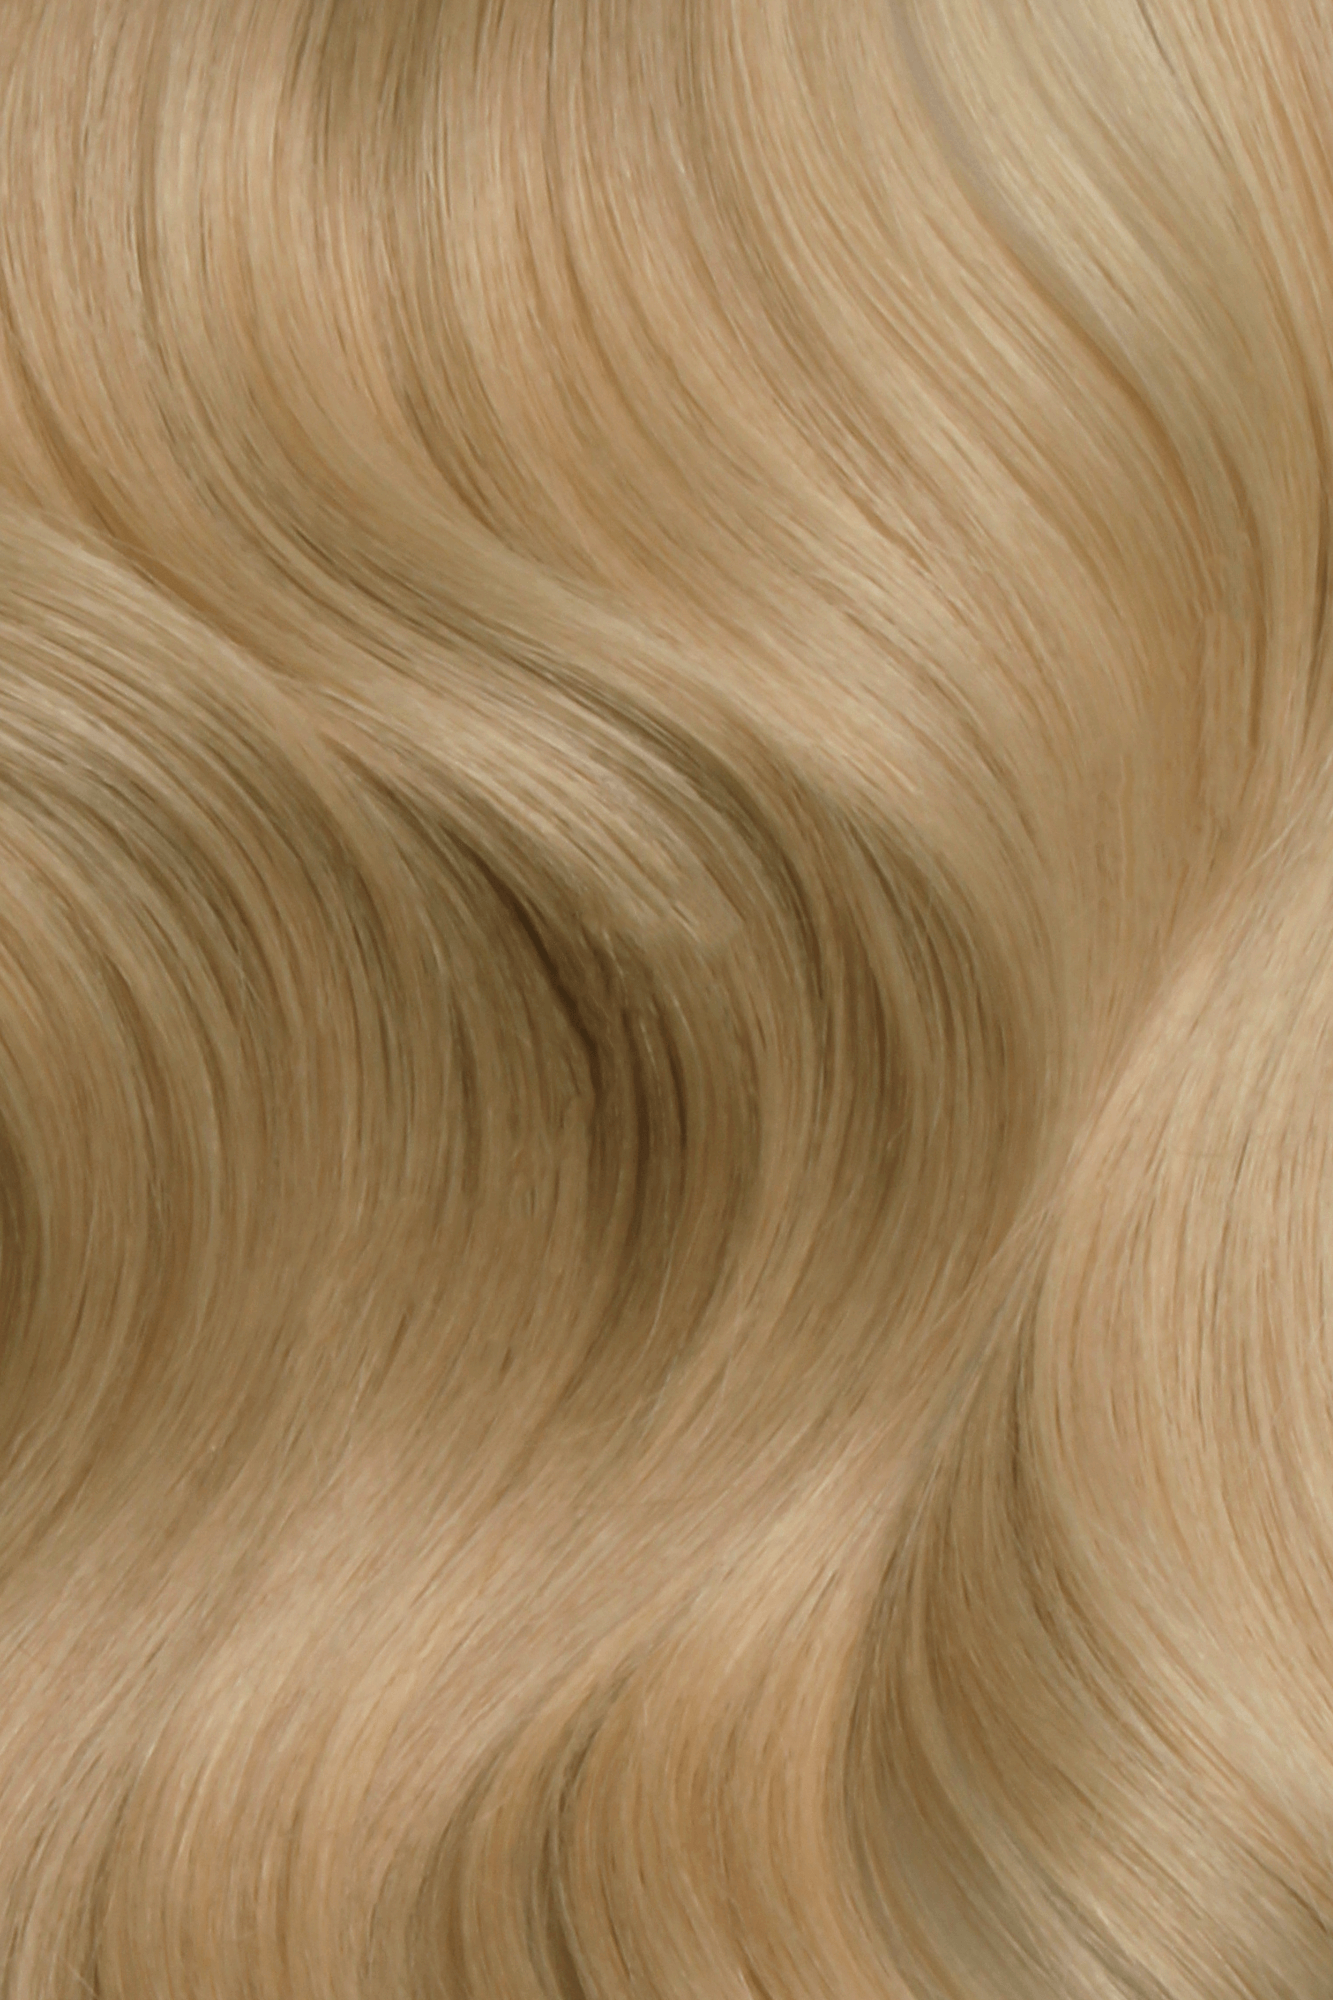 SEAMLESS® Tapes 20 Inches - SWAY Hair Extensions Beach-Blonde-18-22 clip-in hair extensions made of 100% Double Drawn, Remy Human Hair. SWAY SEAMLESS® Tapes, 20 inches. Lightweight, flexible, and perfect for any hairstyle.